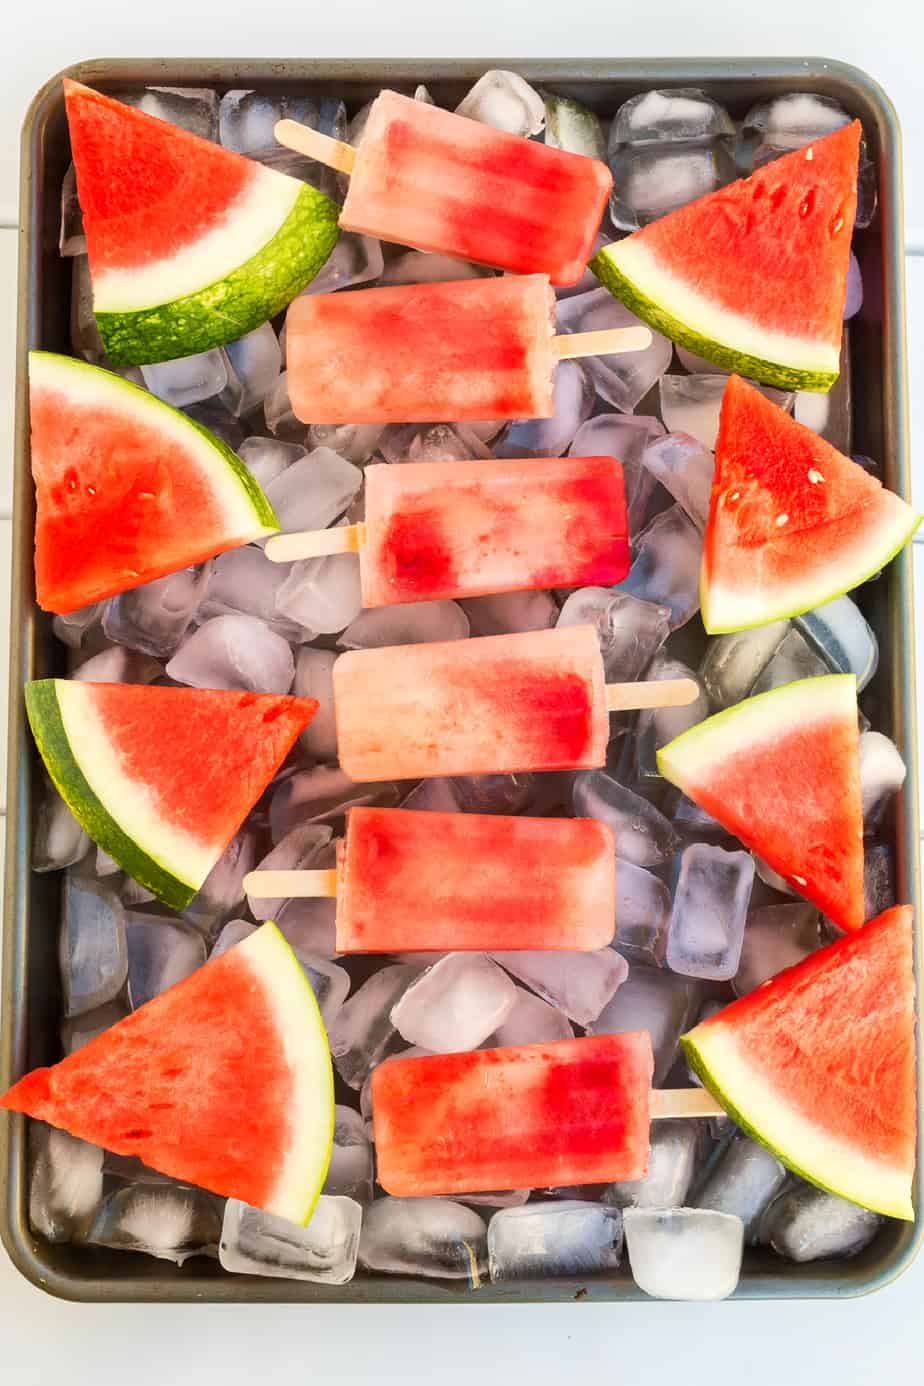 Watermelon popsicles and slices of fresh watermelon on a tray covered in ice from overhead.